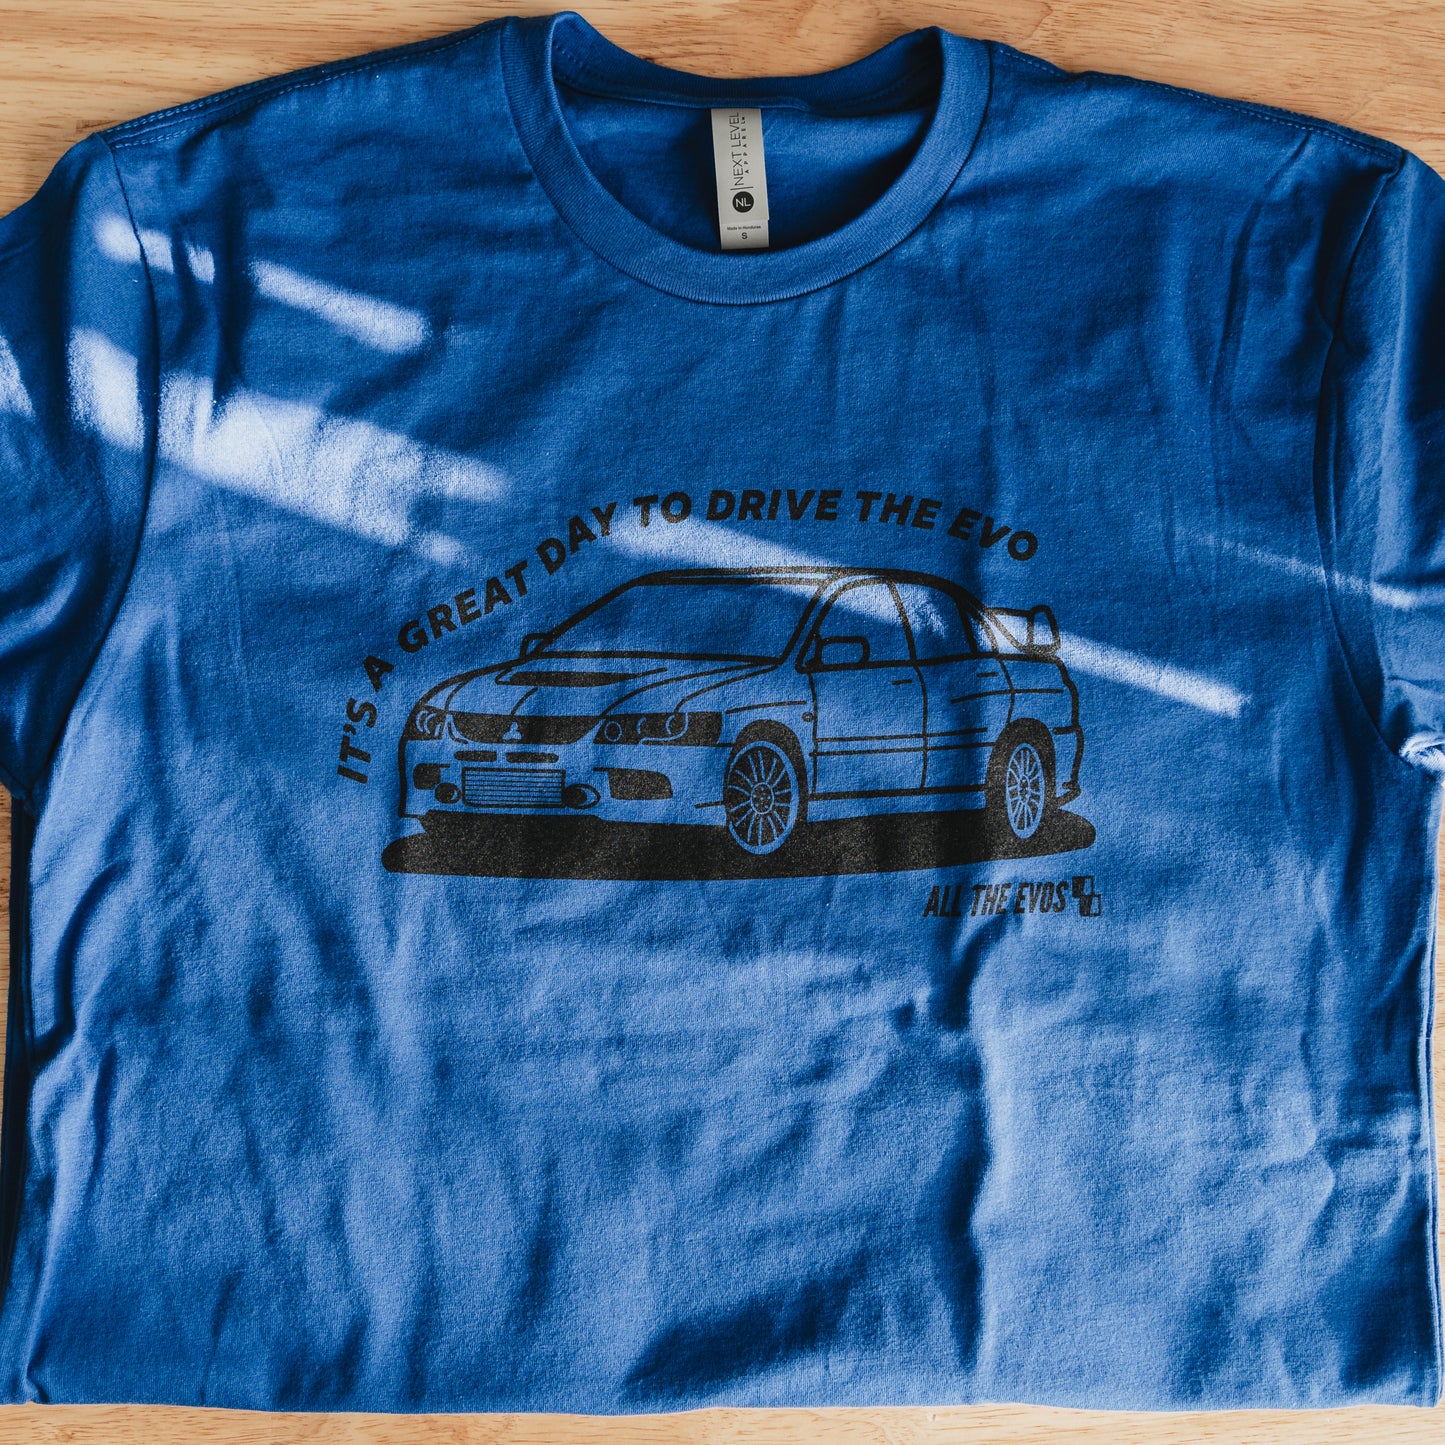 Great Day To Drive The Evo Tshirt